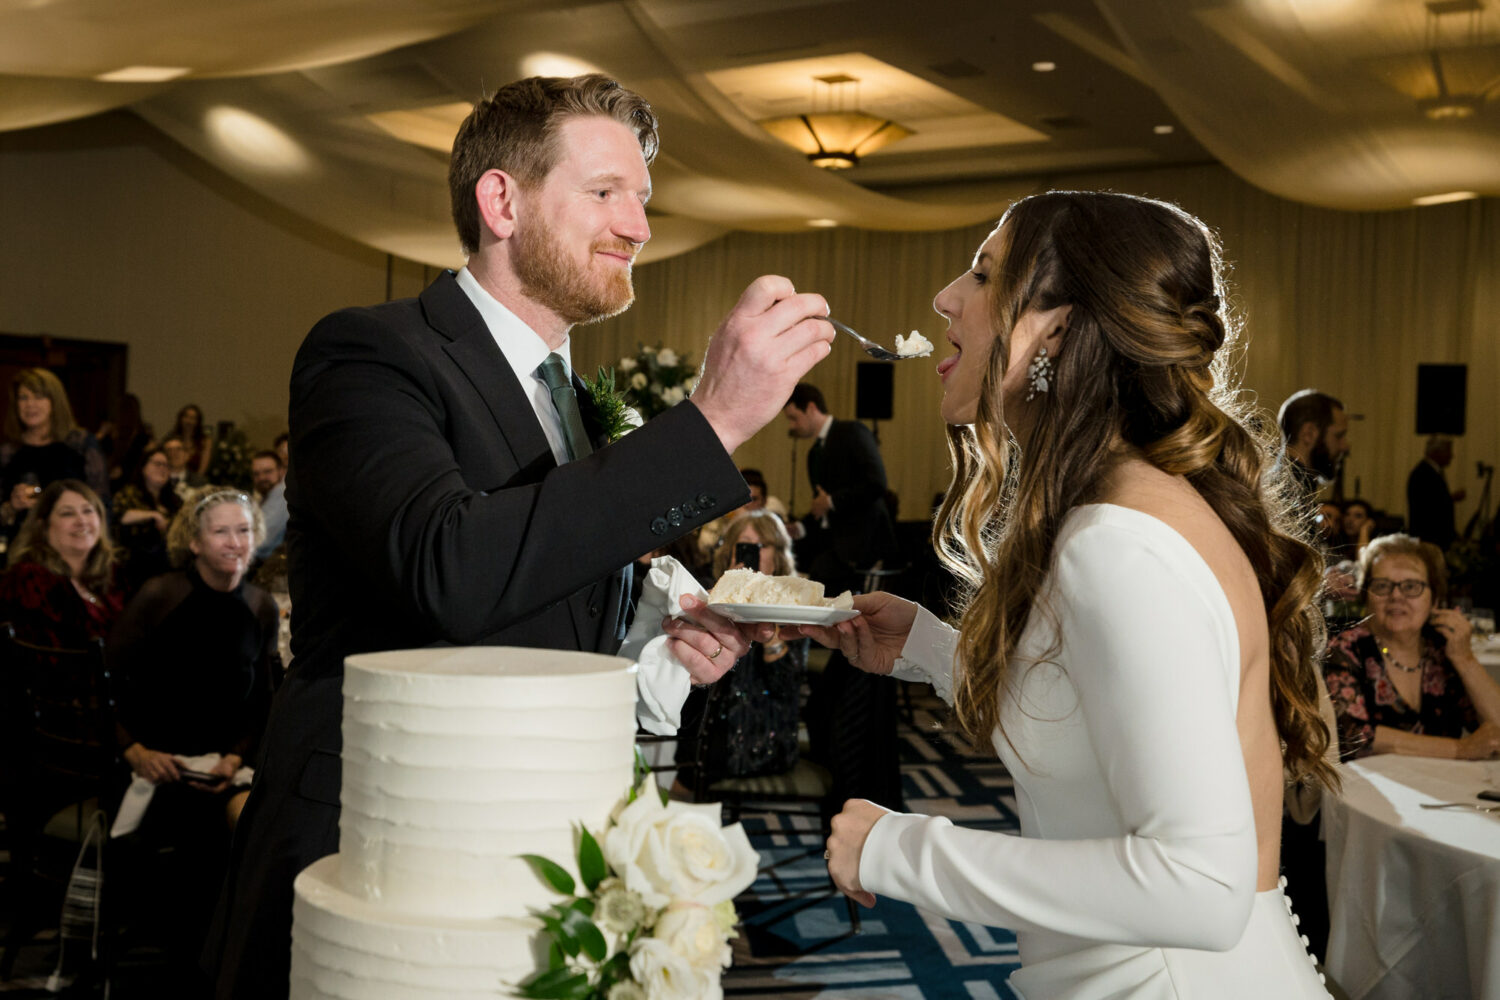 The groom feeds the bride a slice of wedding cake at their reception in the Grand Sierra Ballroom at Everline Resort.